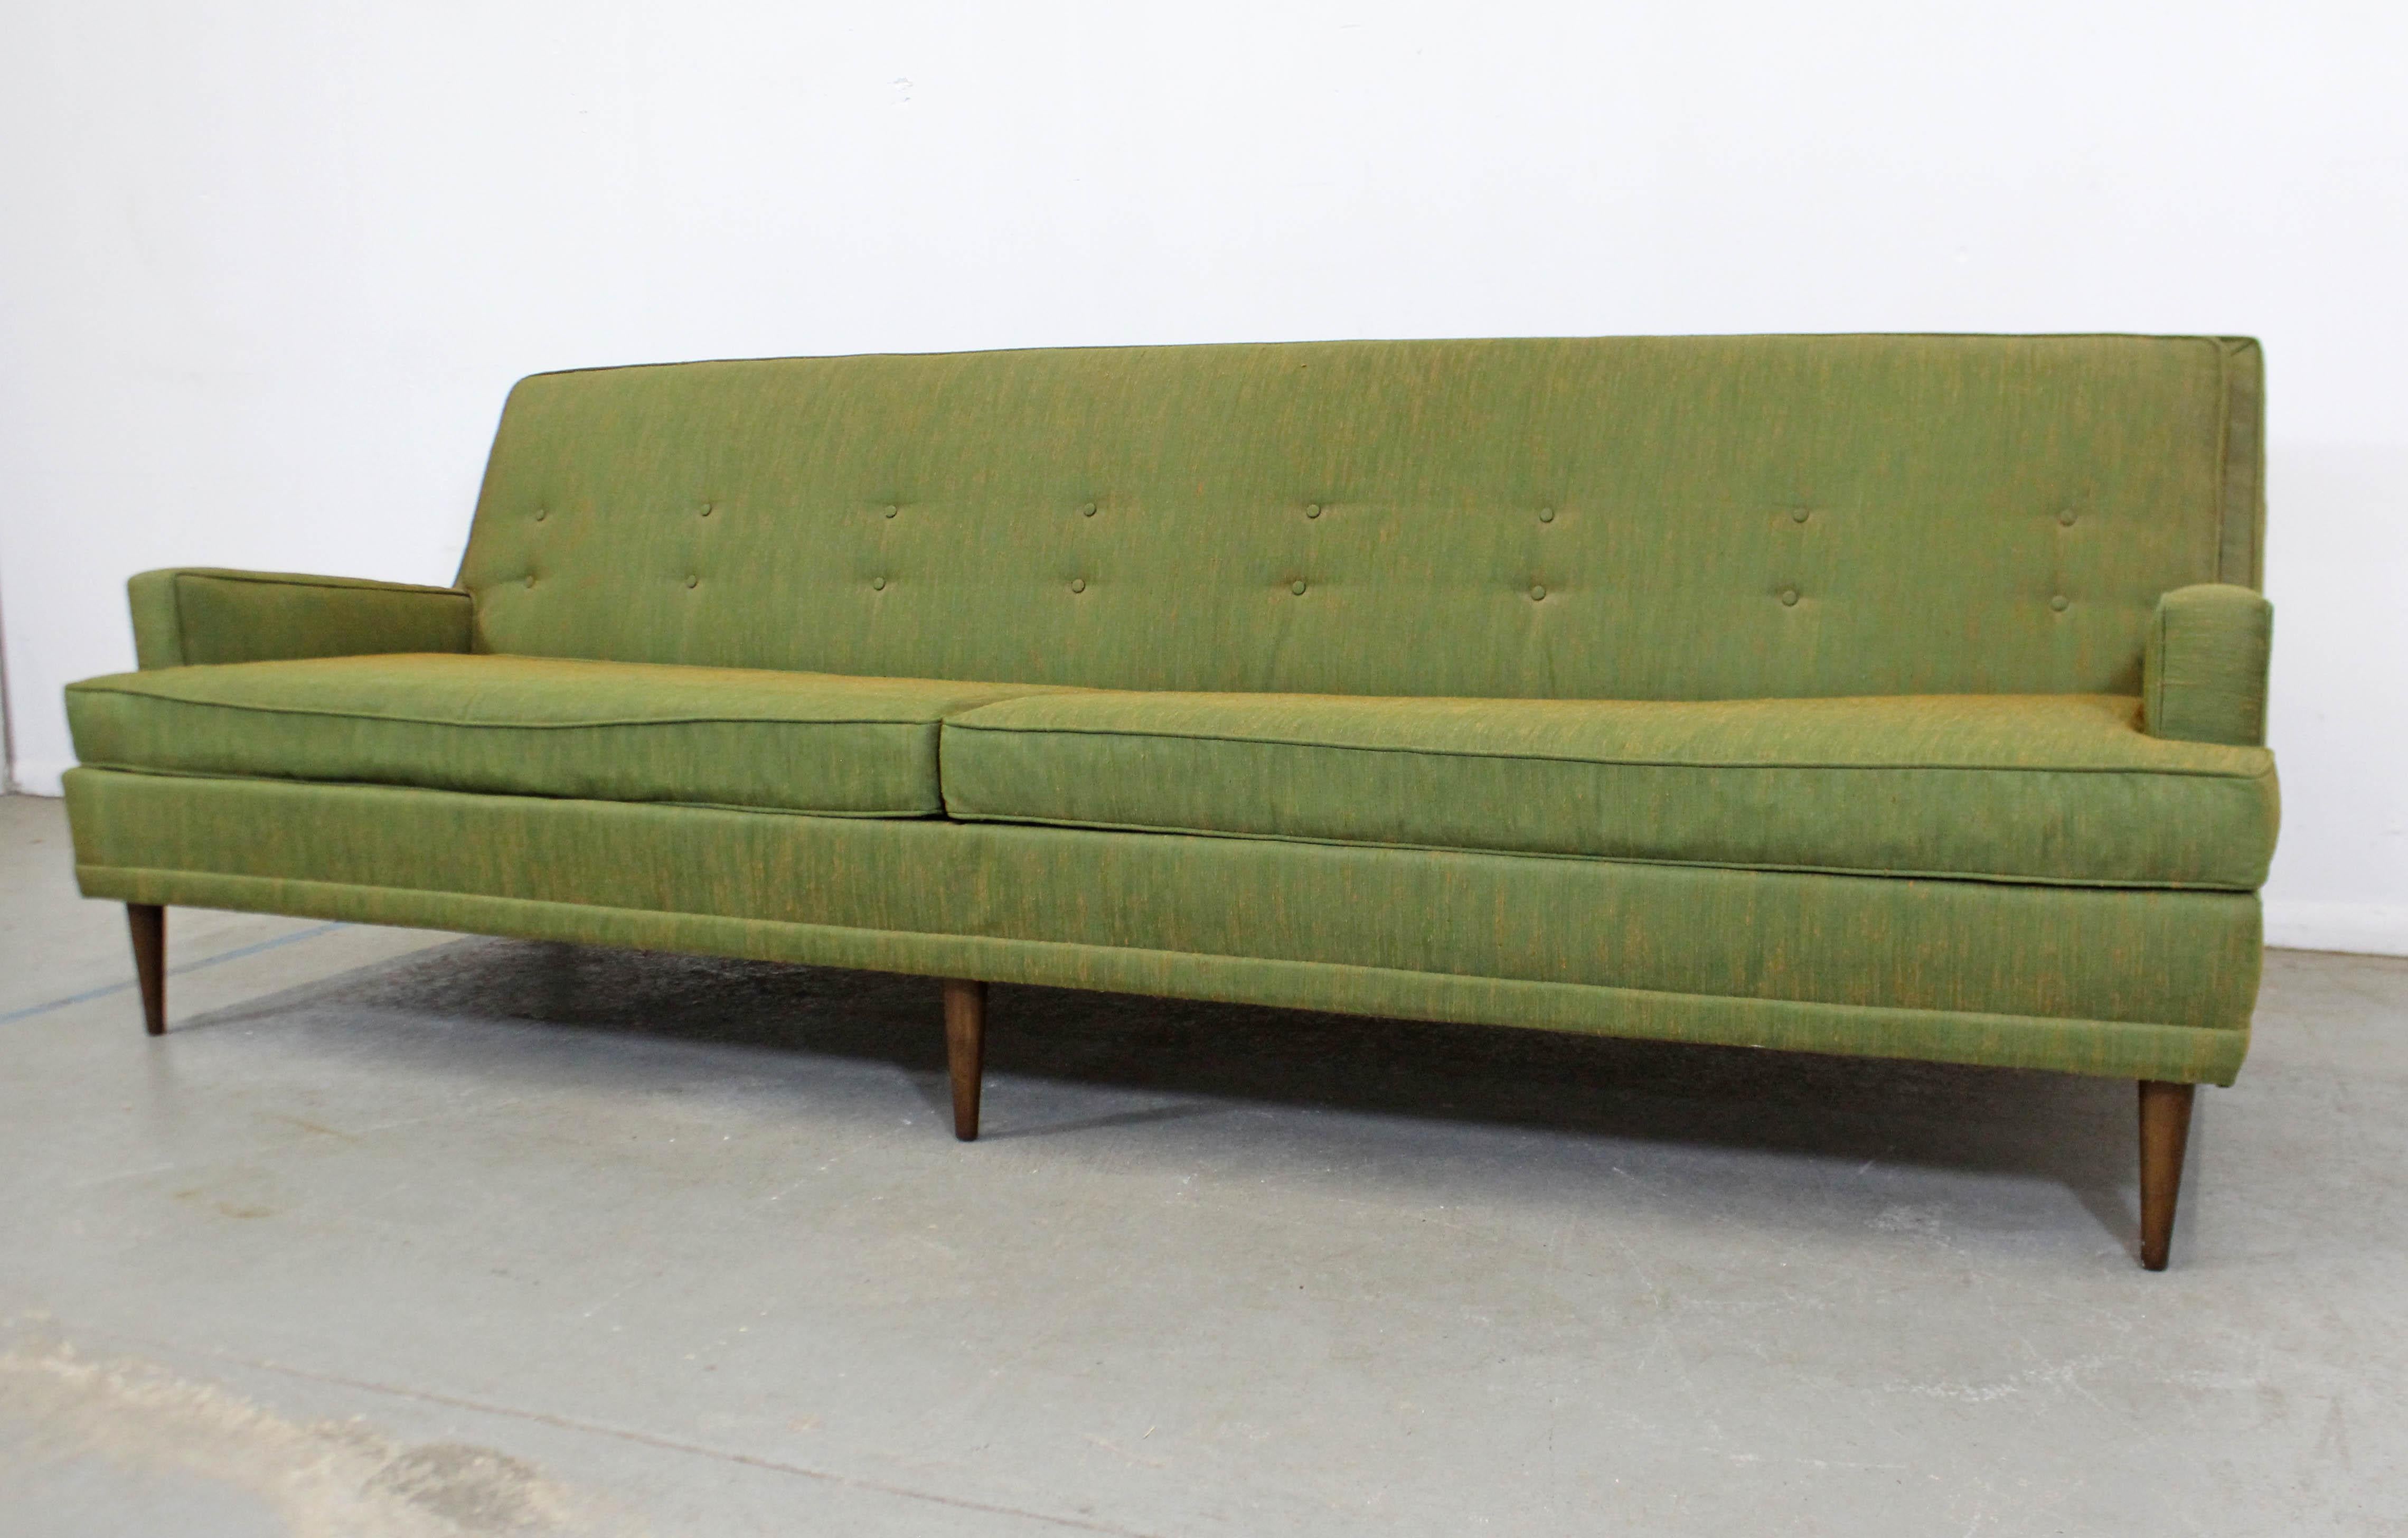 What a find. Offered is a Mid-Century Modern sofa by Kroehler. Features original green upholstery, two large seat cushions and back cushions. Seat cushions are removable, back cushions are not. It is in decent condition, but needs to reupholstered